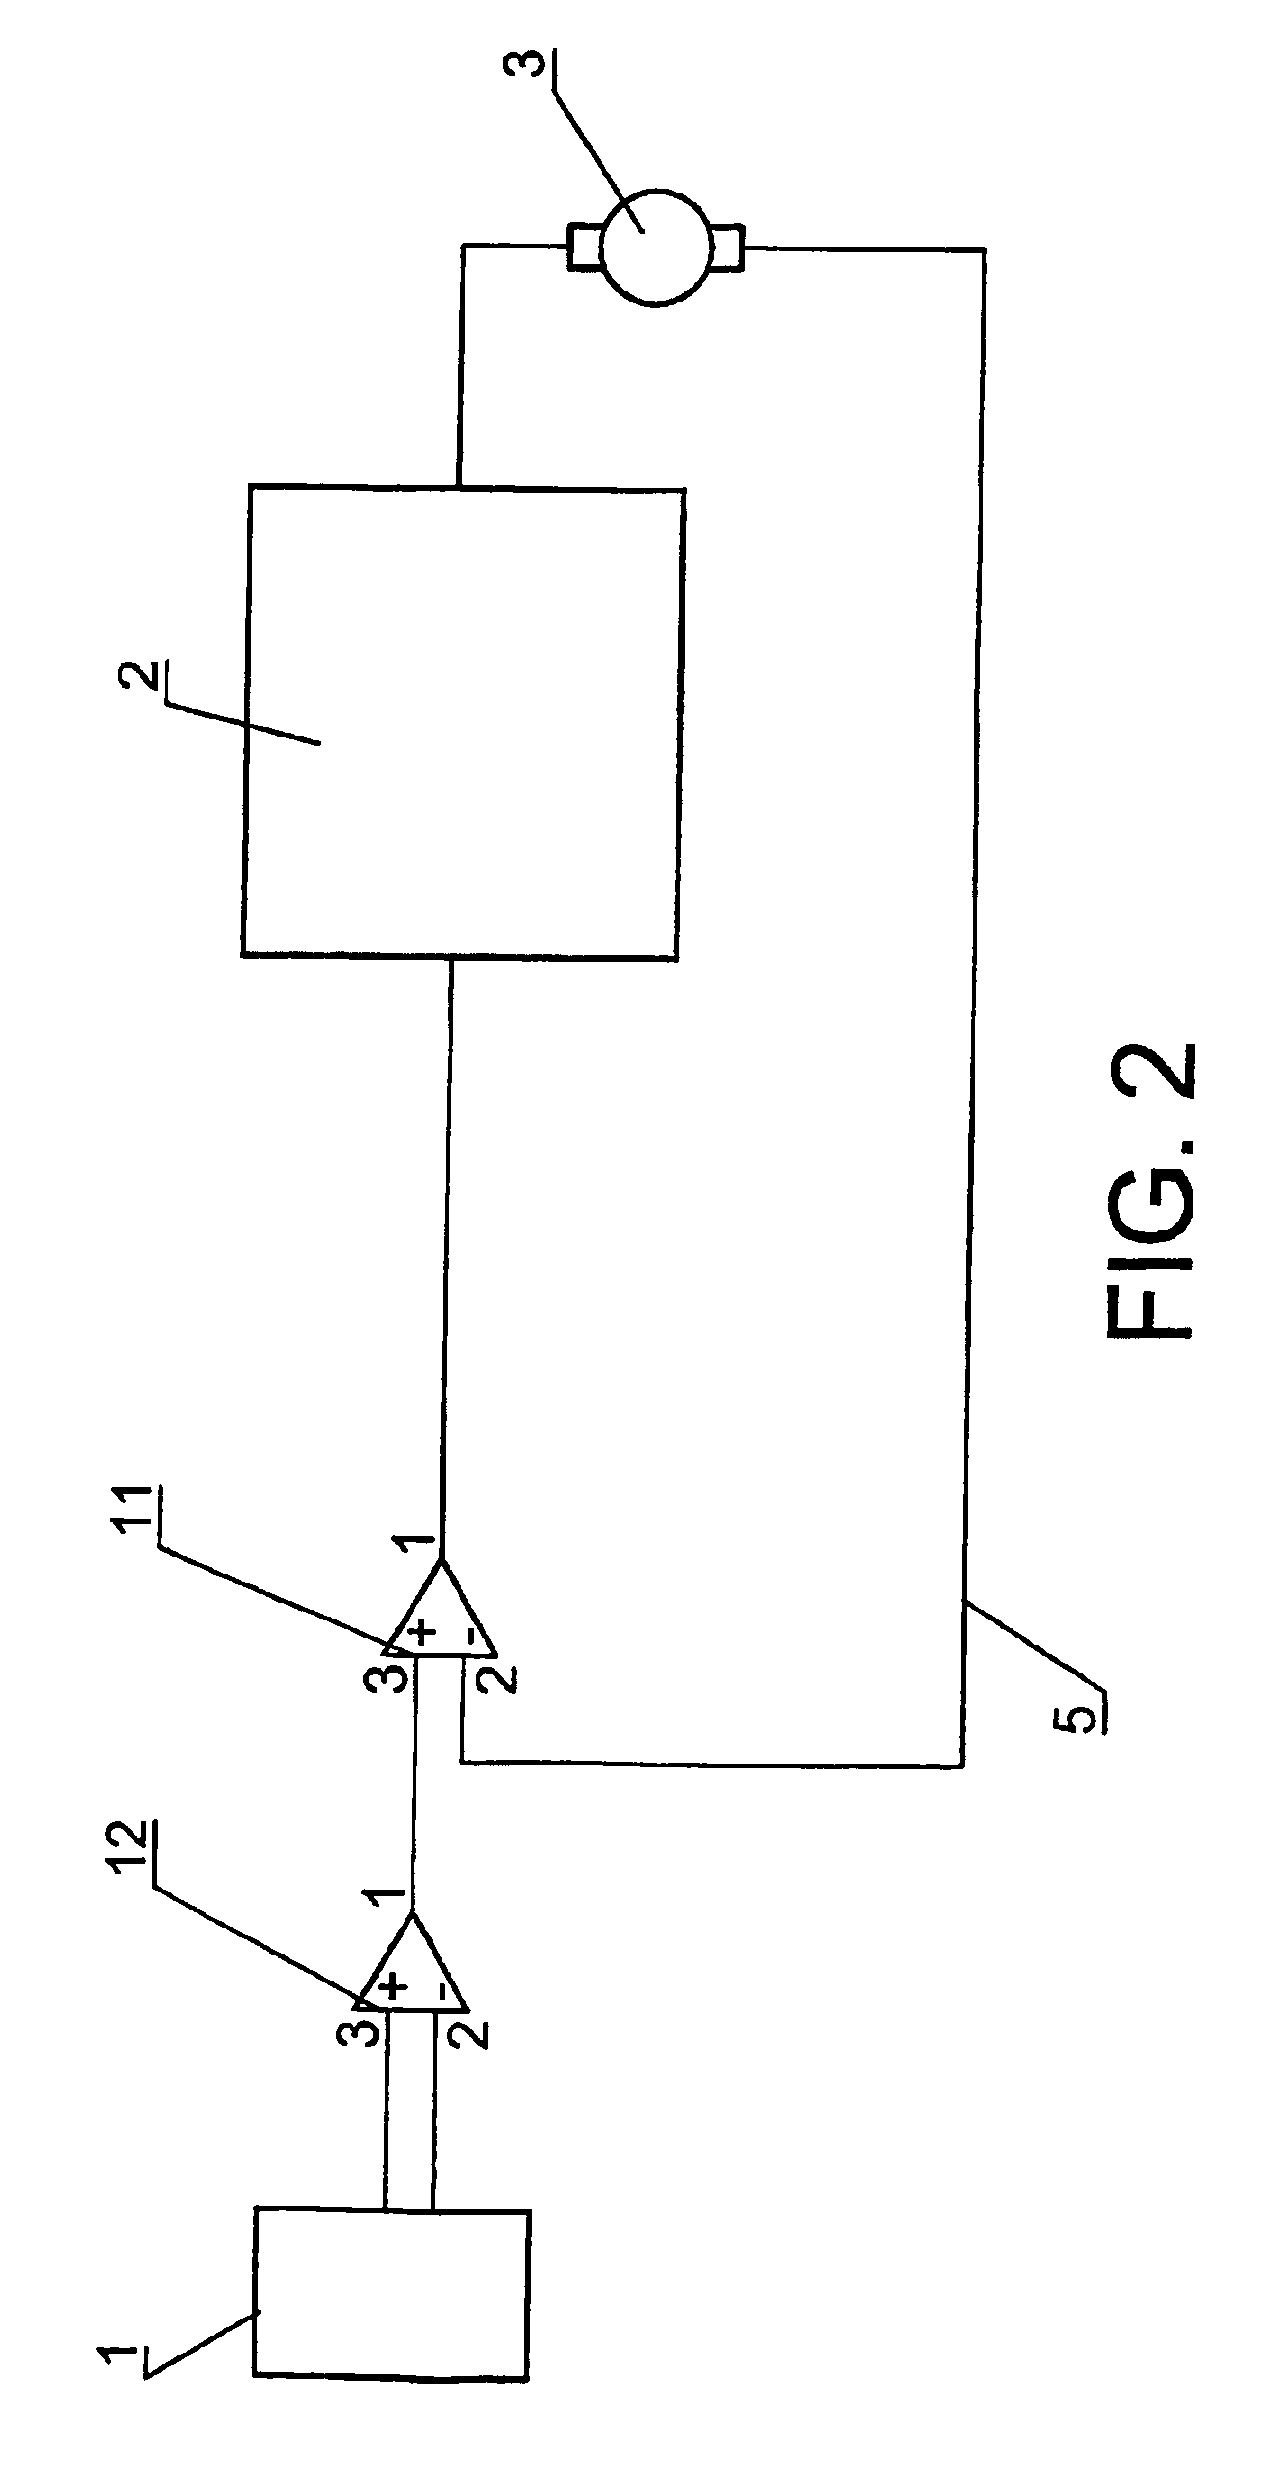 System for controlling electric motors used for the propulsion of a transport trolley